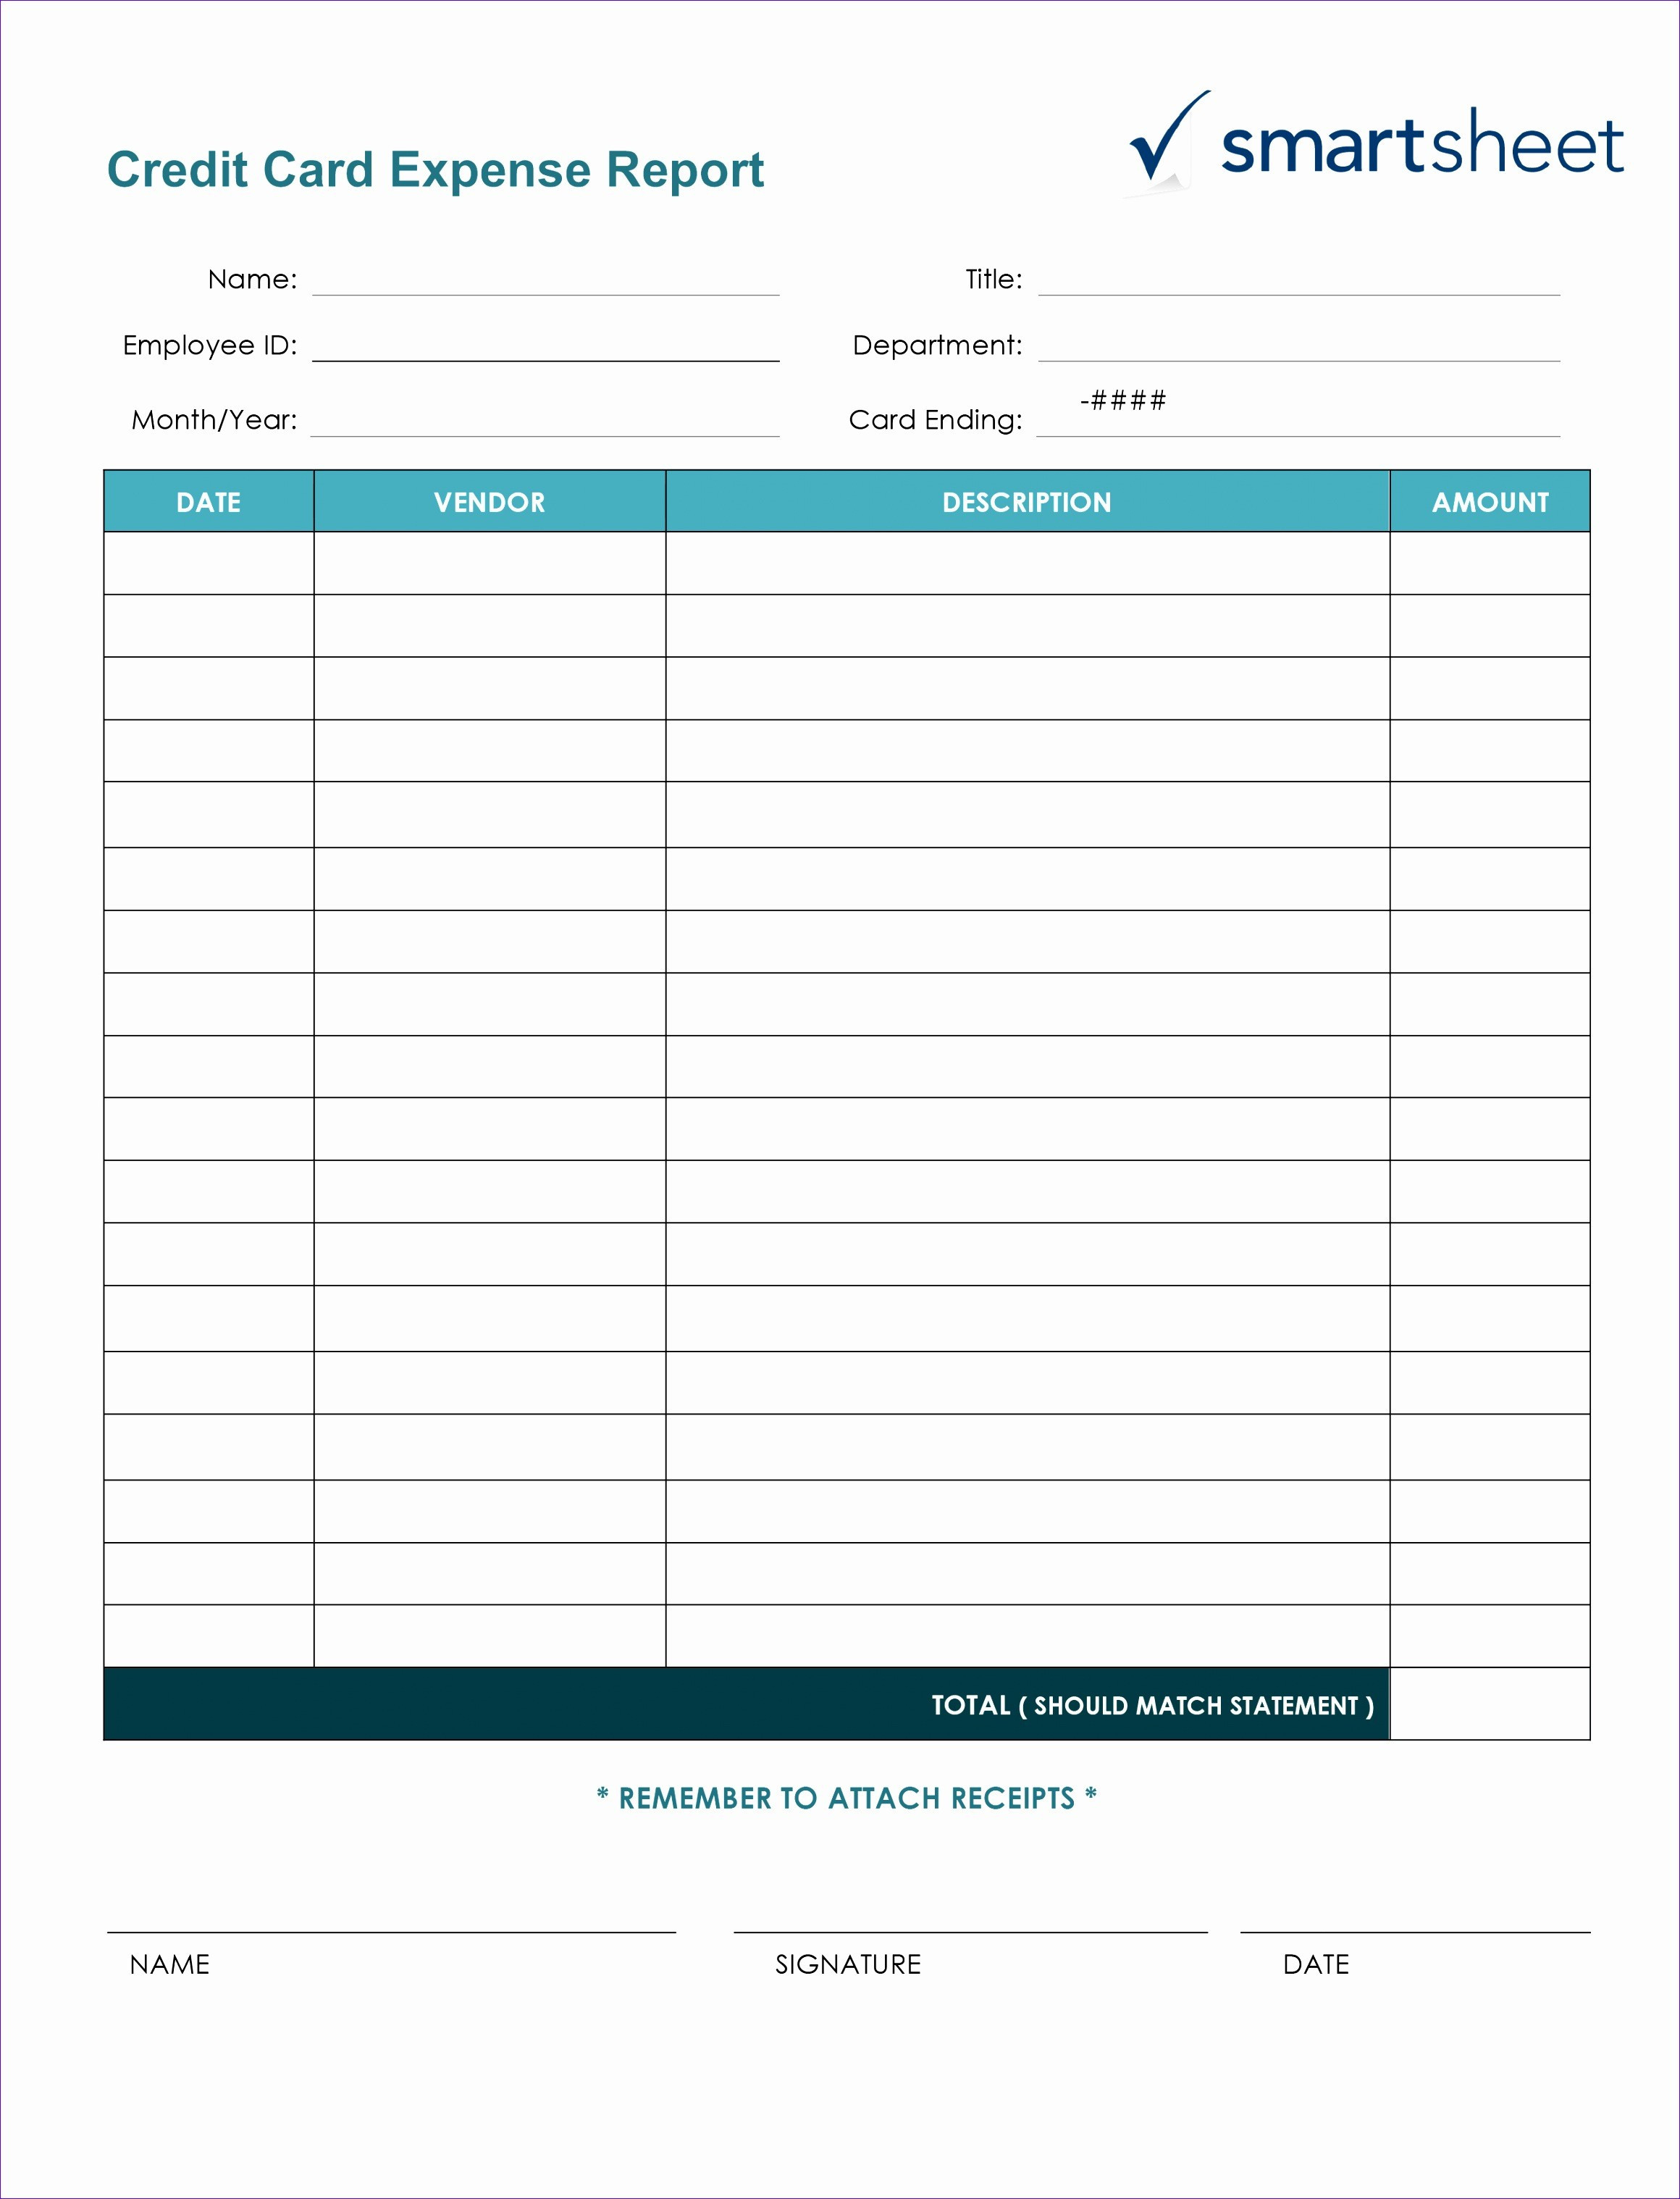 reconciliation-excel-spreadsheet-intended-for-balance-sheet-template-spreadsheet-with